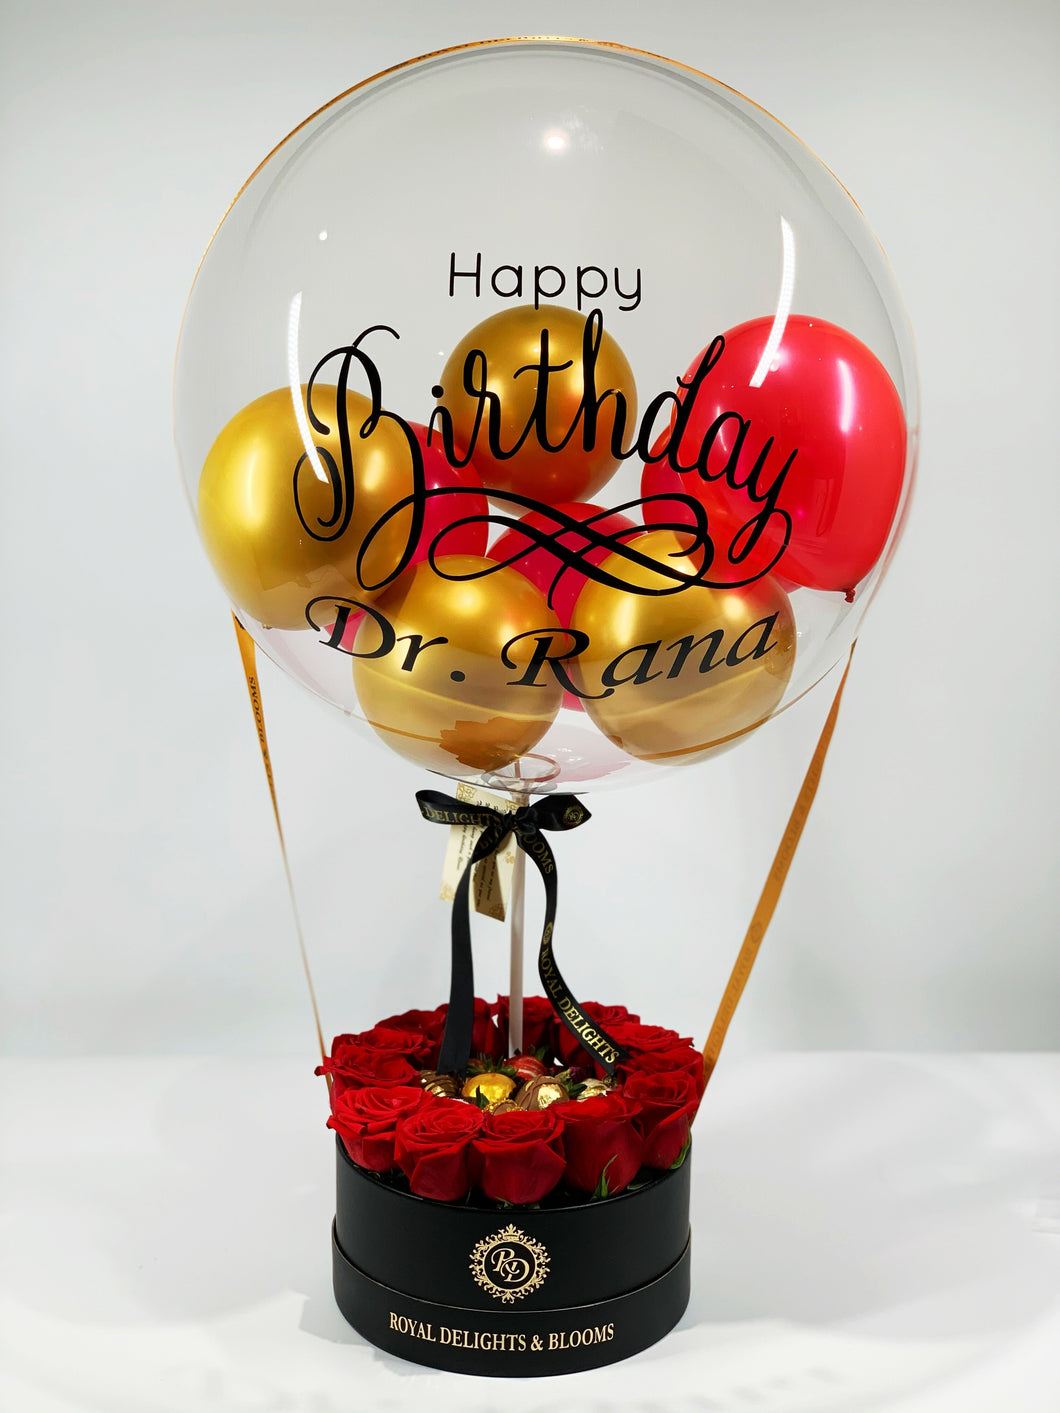 Luxurious Roses and Berries with Personalized Balloon